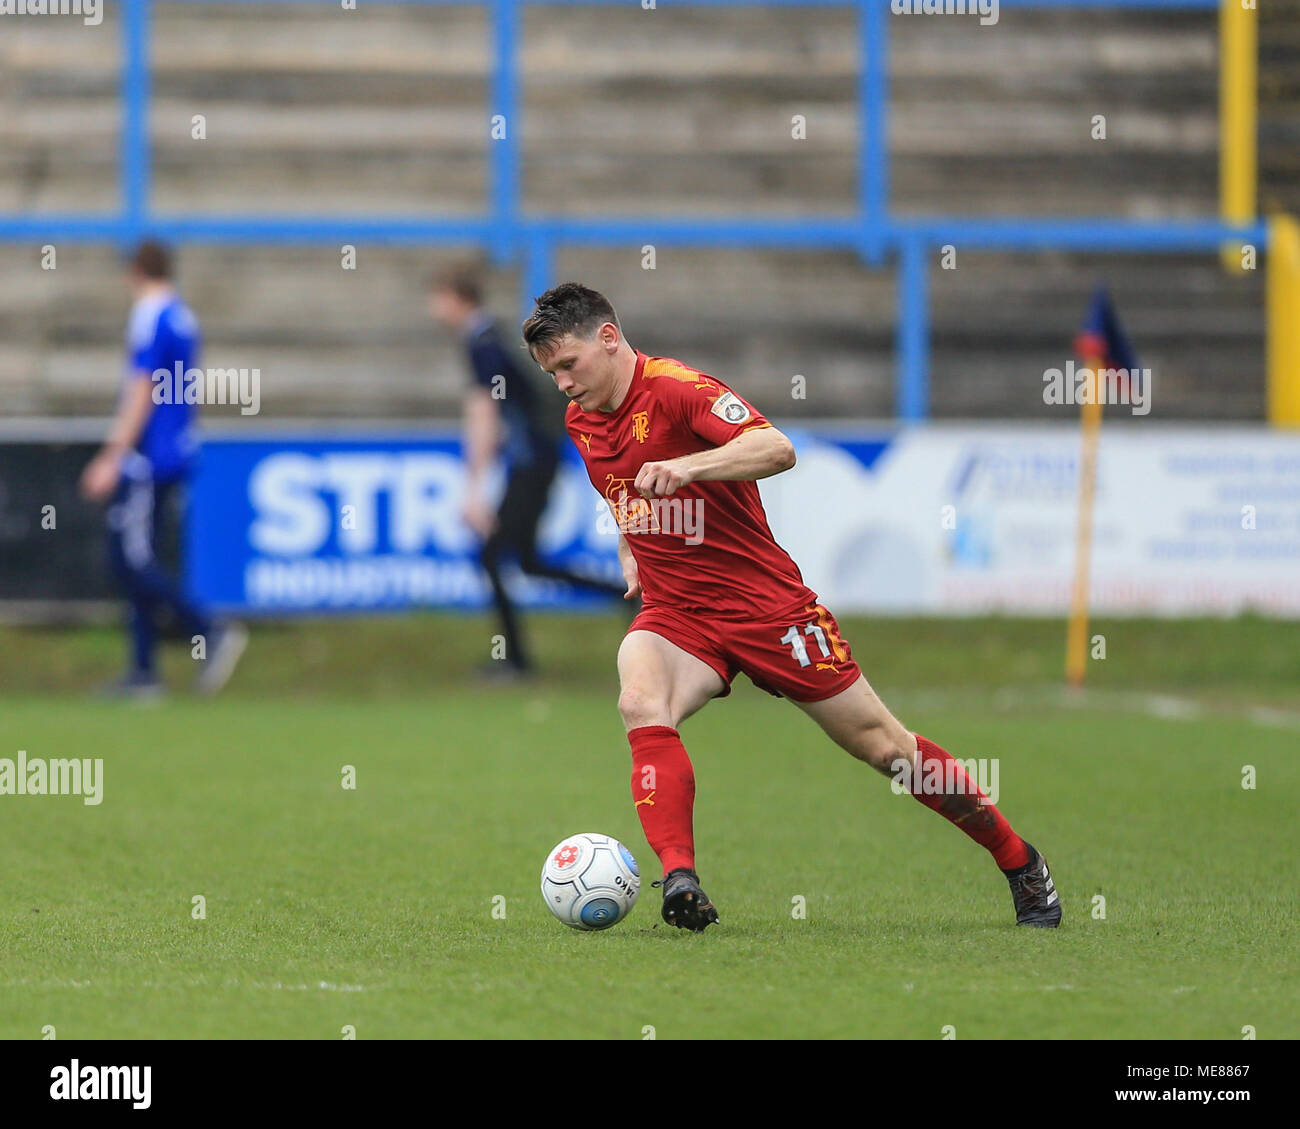 Halifax, Royaume-Uni. 21 avril, 2018. Ligue nationale, Halifax Town v Tranmere Rovers, Connor Tranmere Rovers de Jennings : Crédit News Images /Alamy Live News Banque D'Images